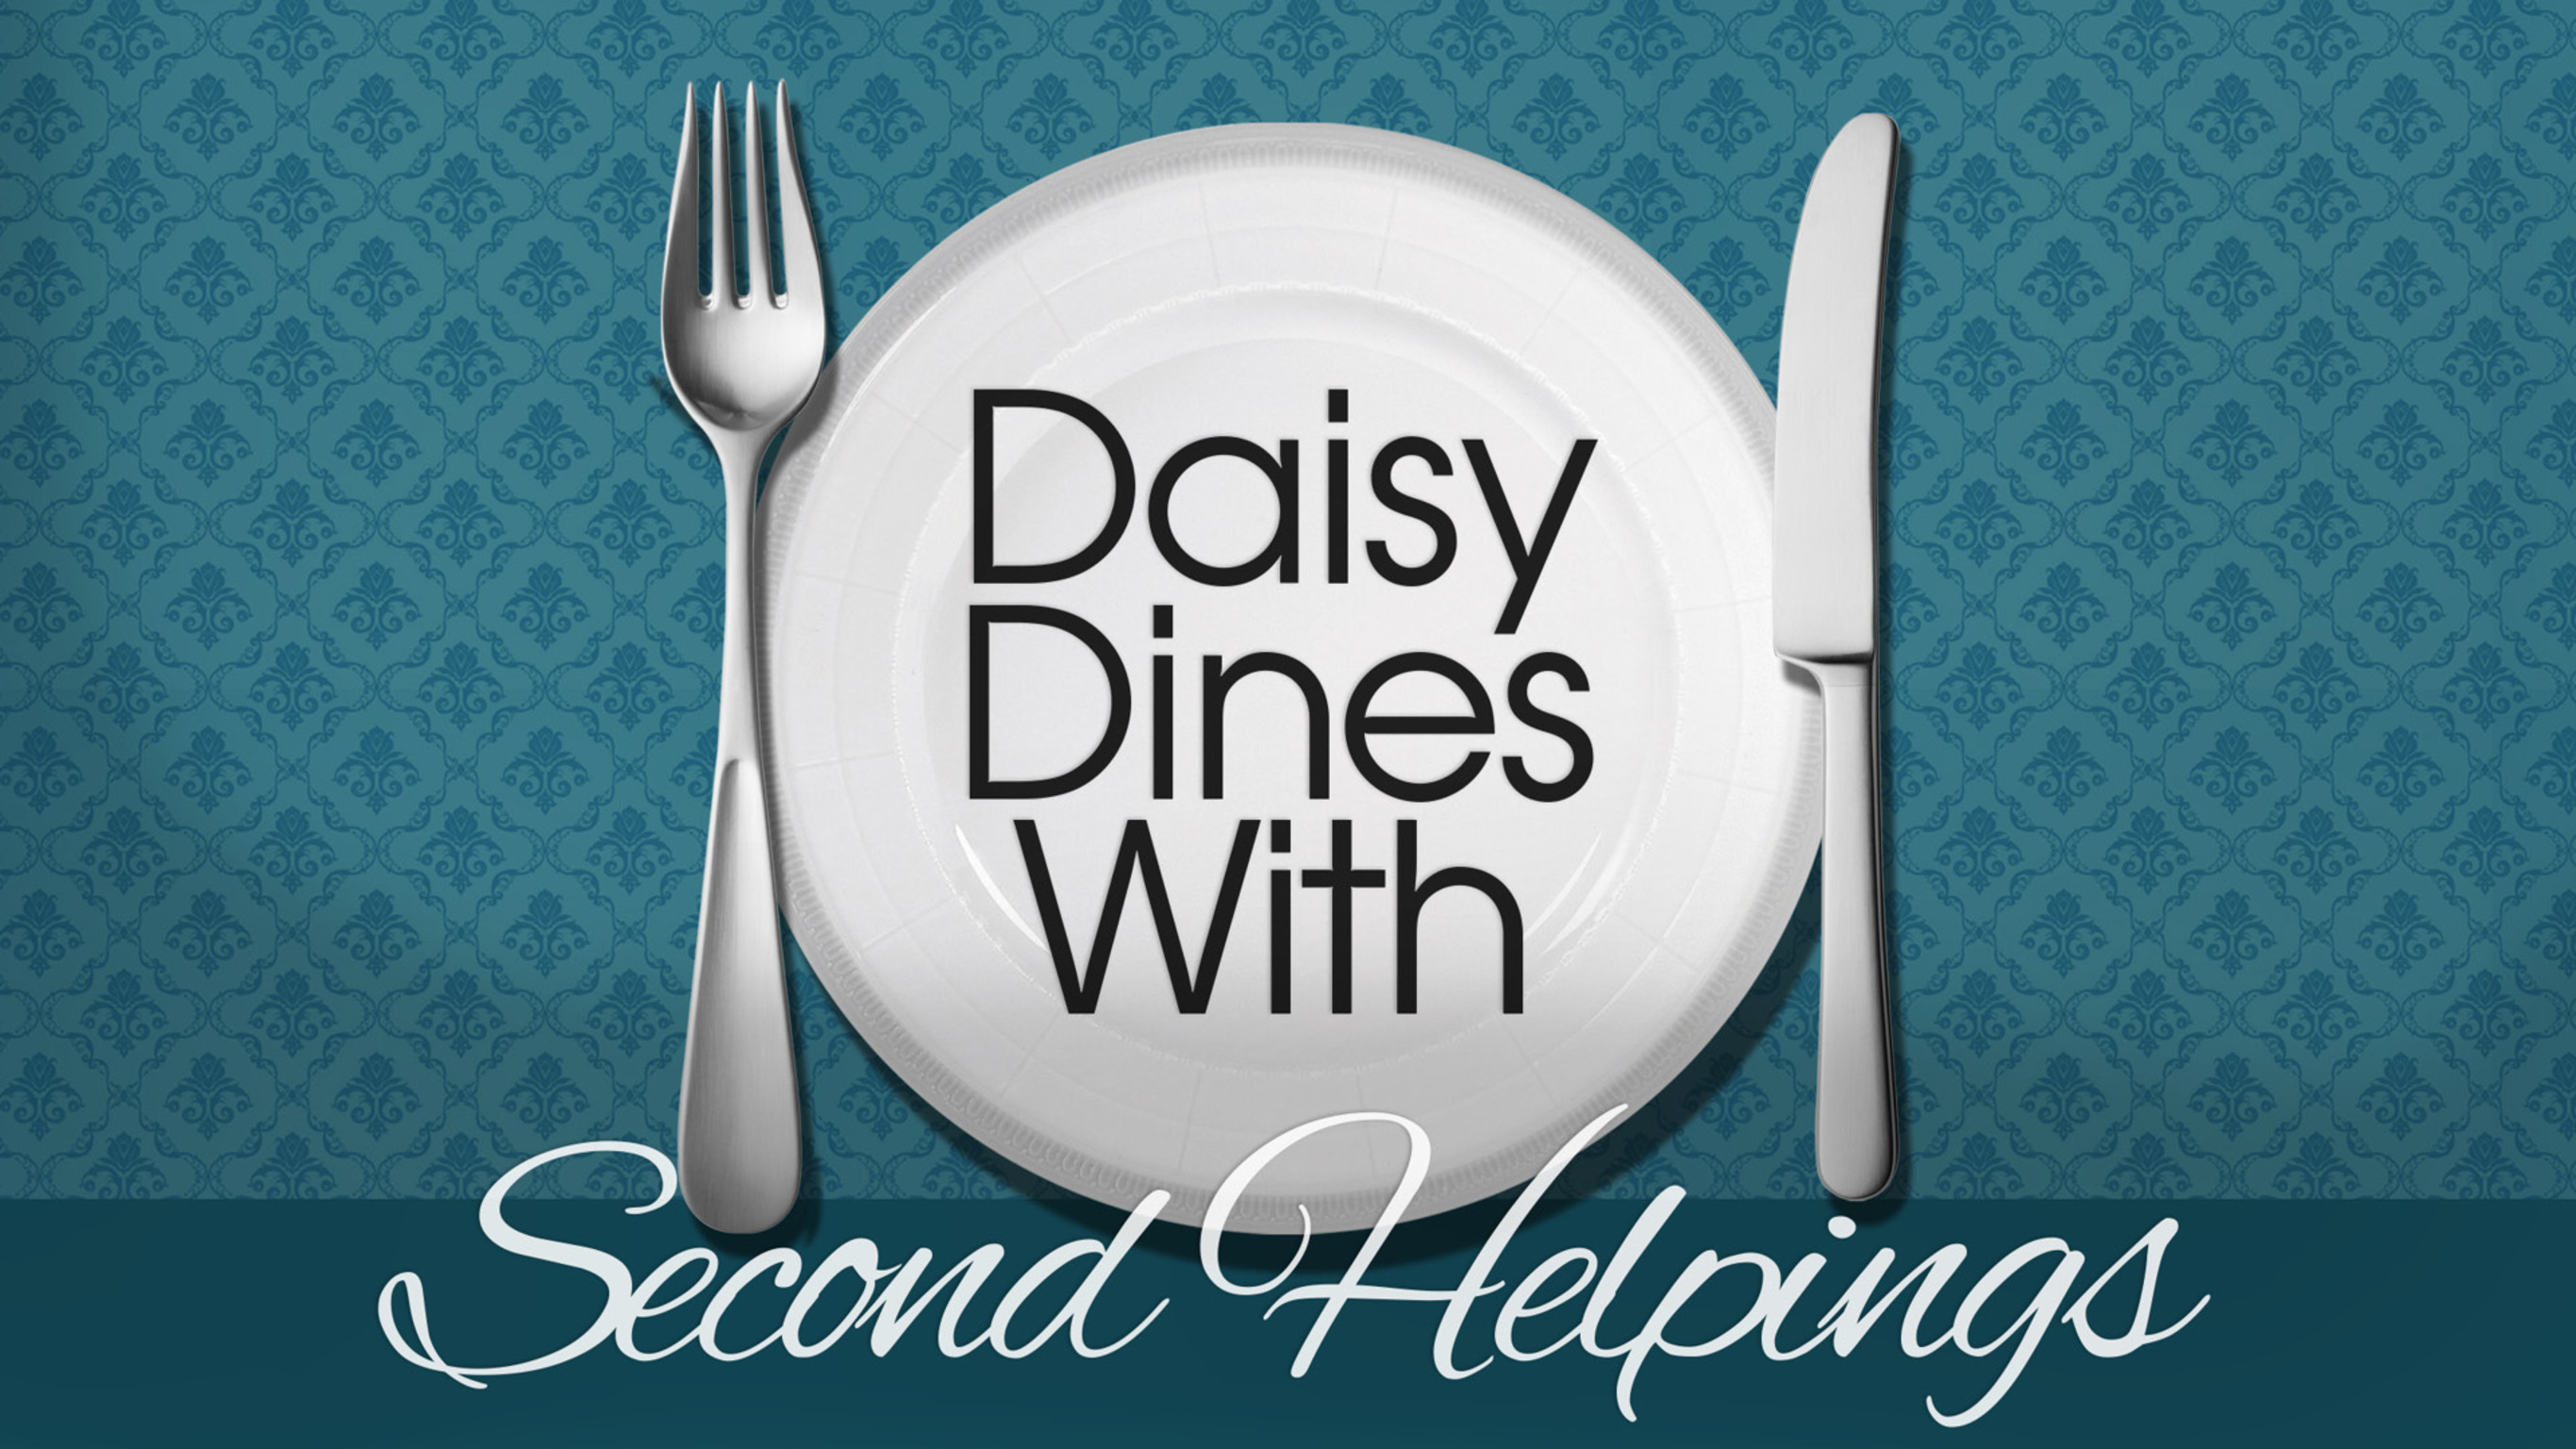 Daisy Dines With: Second Helpings